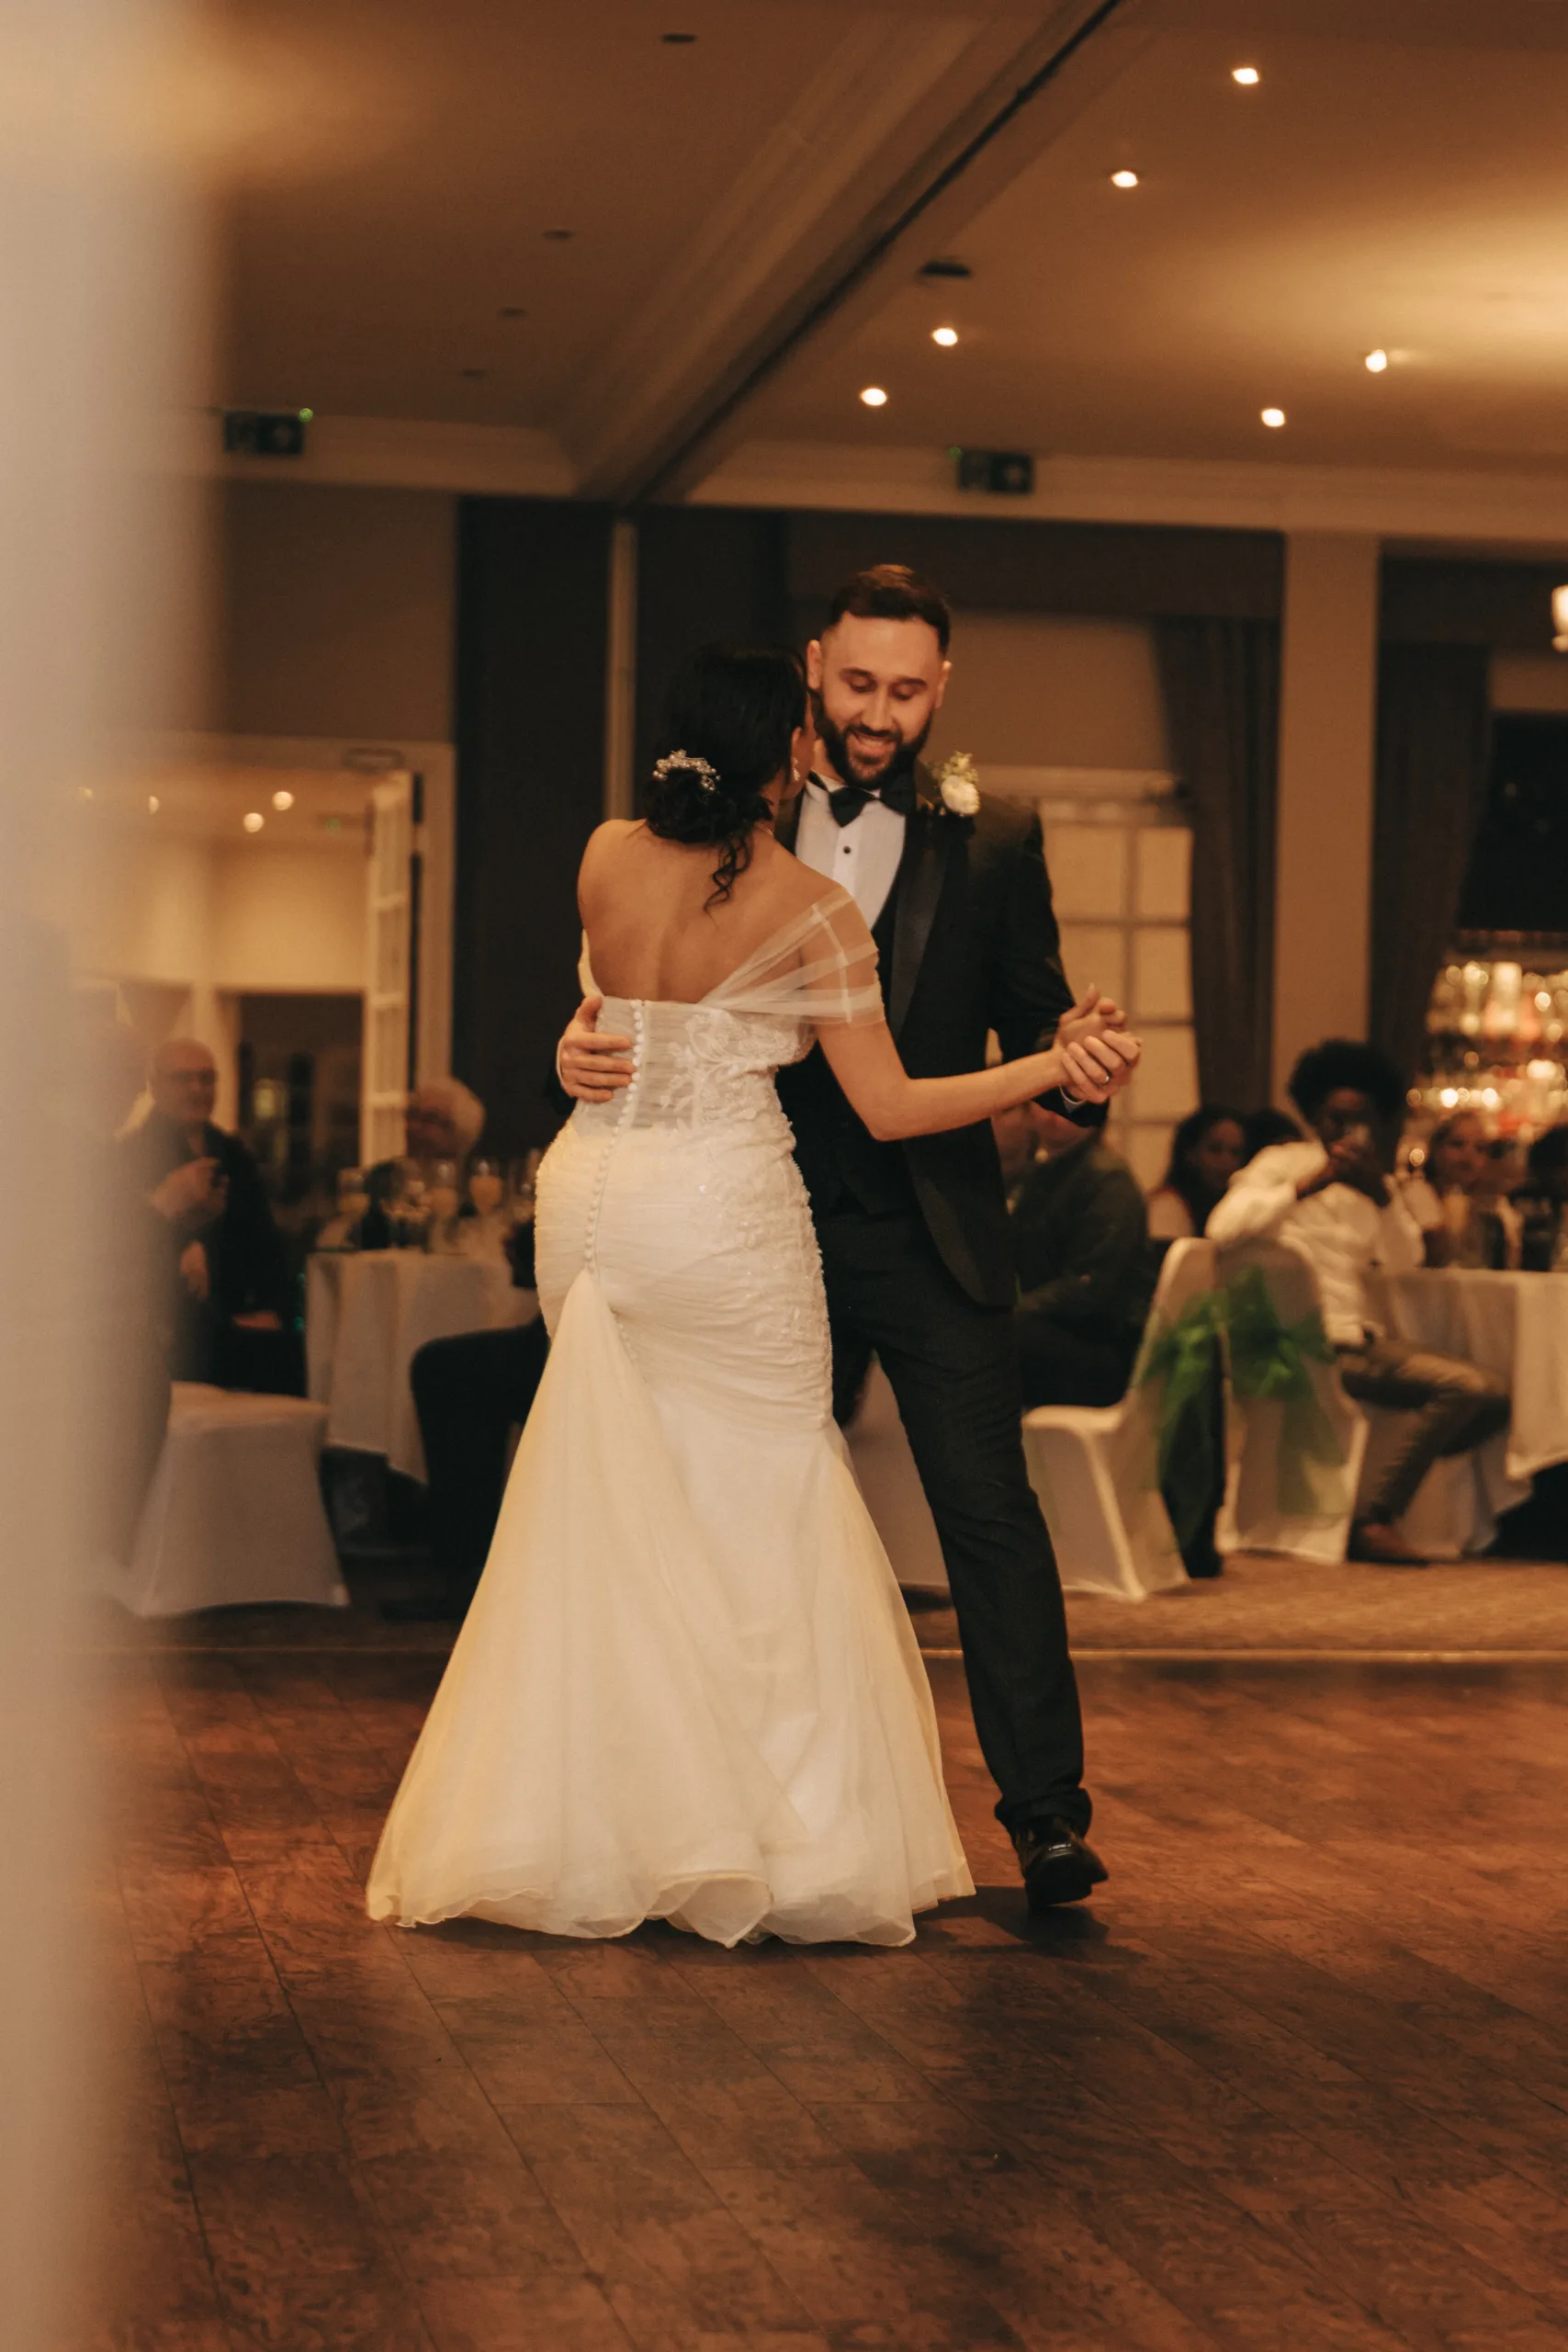 A bride and groom sharing their first dance at a Yorkshire wedding reception, captured by a photographer.